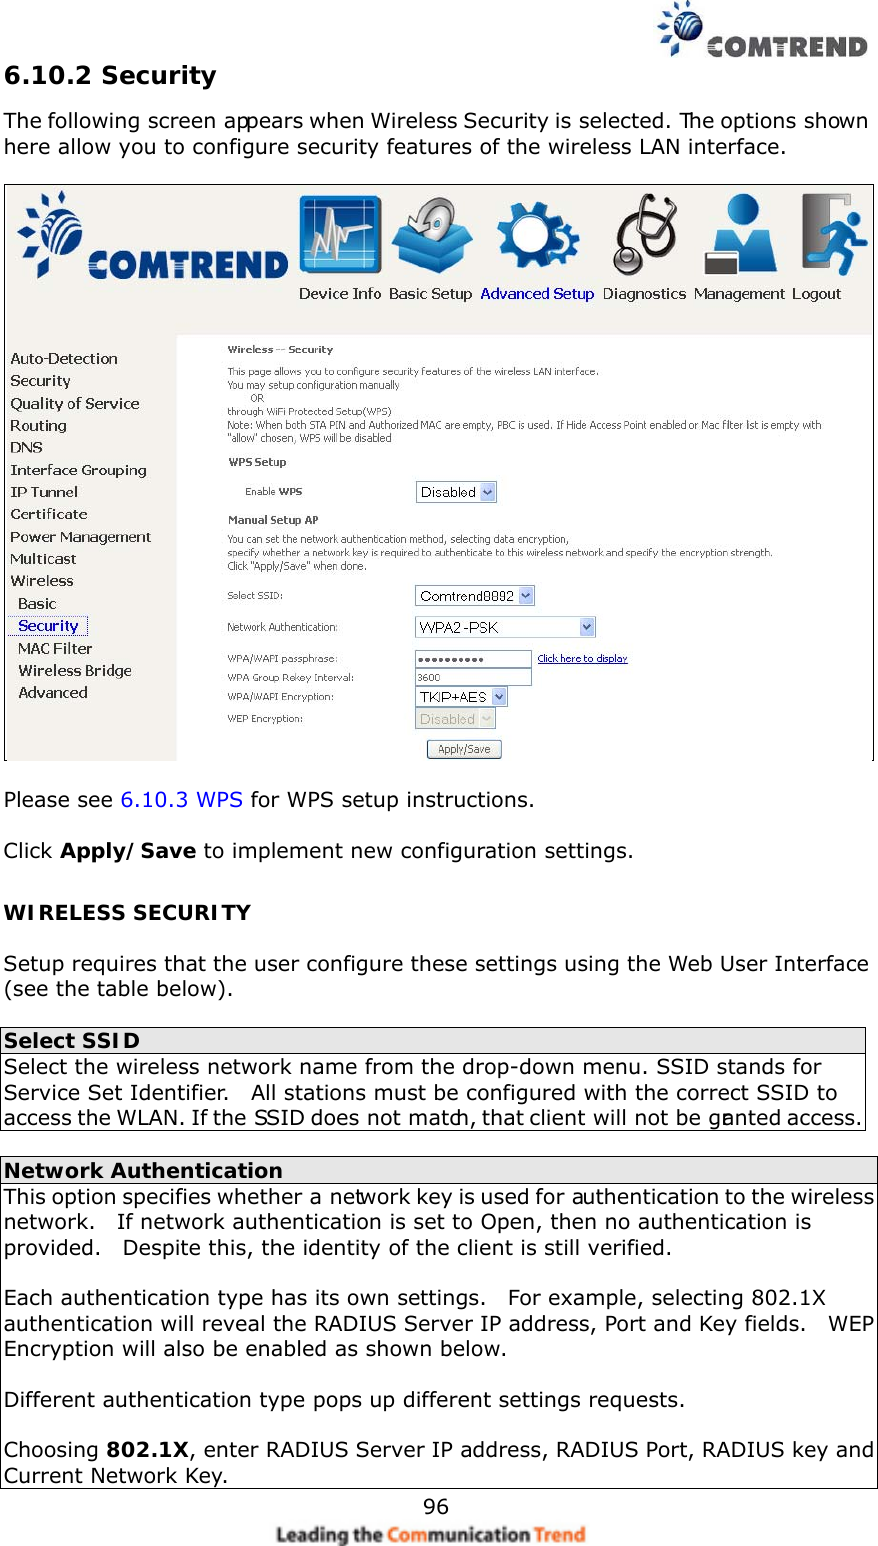    966.10.2 Security The following screen appears when Wireless Security is selected. The options shown here allow you to configure security features of the wireless LAN interface.    Please see 6.10.3 WPS for WPS setup instructions.  Click Apply/Save to implement new configuration settings. WIRELESS SECURITY  Setup requires that the user configure these settings using the Web User Interface (see the table below).   Select SSID Select the wireless network name from the drop-down menu. SSID stands for Service Set Identifier.    All stations must be configured with the correct SSID to access the WLAN. If the SSID does not match, that client will not be granted access.  Network Authentication This option specifies whether a network key is used for authentication to the wireless network.    If network authentication is set to Open, then no authentication is provided.    Despite this, the identity of the client is still verified.      Each authentication type has its own settings.    For example, selecting 802.1X authentication will reveal the RADIUS Server IP address, Port and Key fields.    WEP Encryption will also be enabled as shown below.  Different authentication type pops up different settings requests.  Choosing 802.1X, enter RADIUS Server IP address, RADIUS Port, RADIUS key and Current Network Key. 